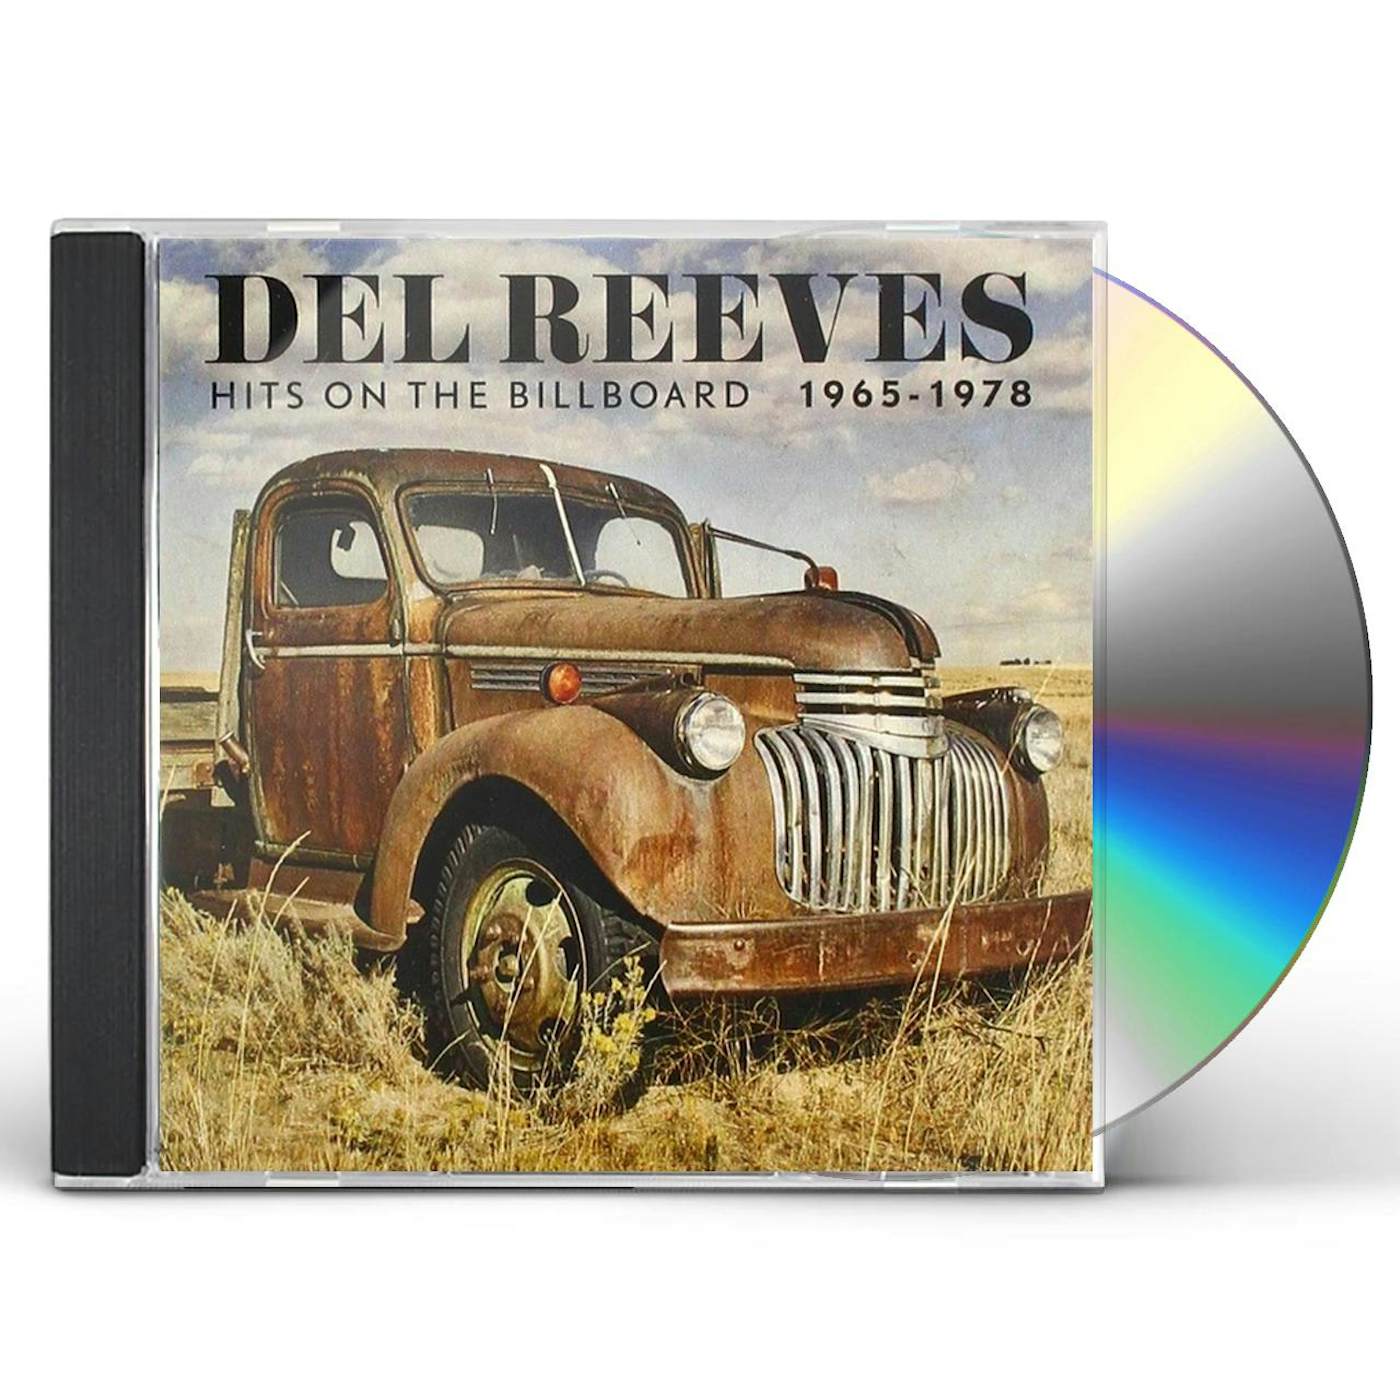 Del Reeves HITS ON THE BILLBOARD 1965-1978 CD